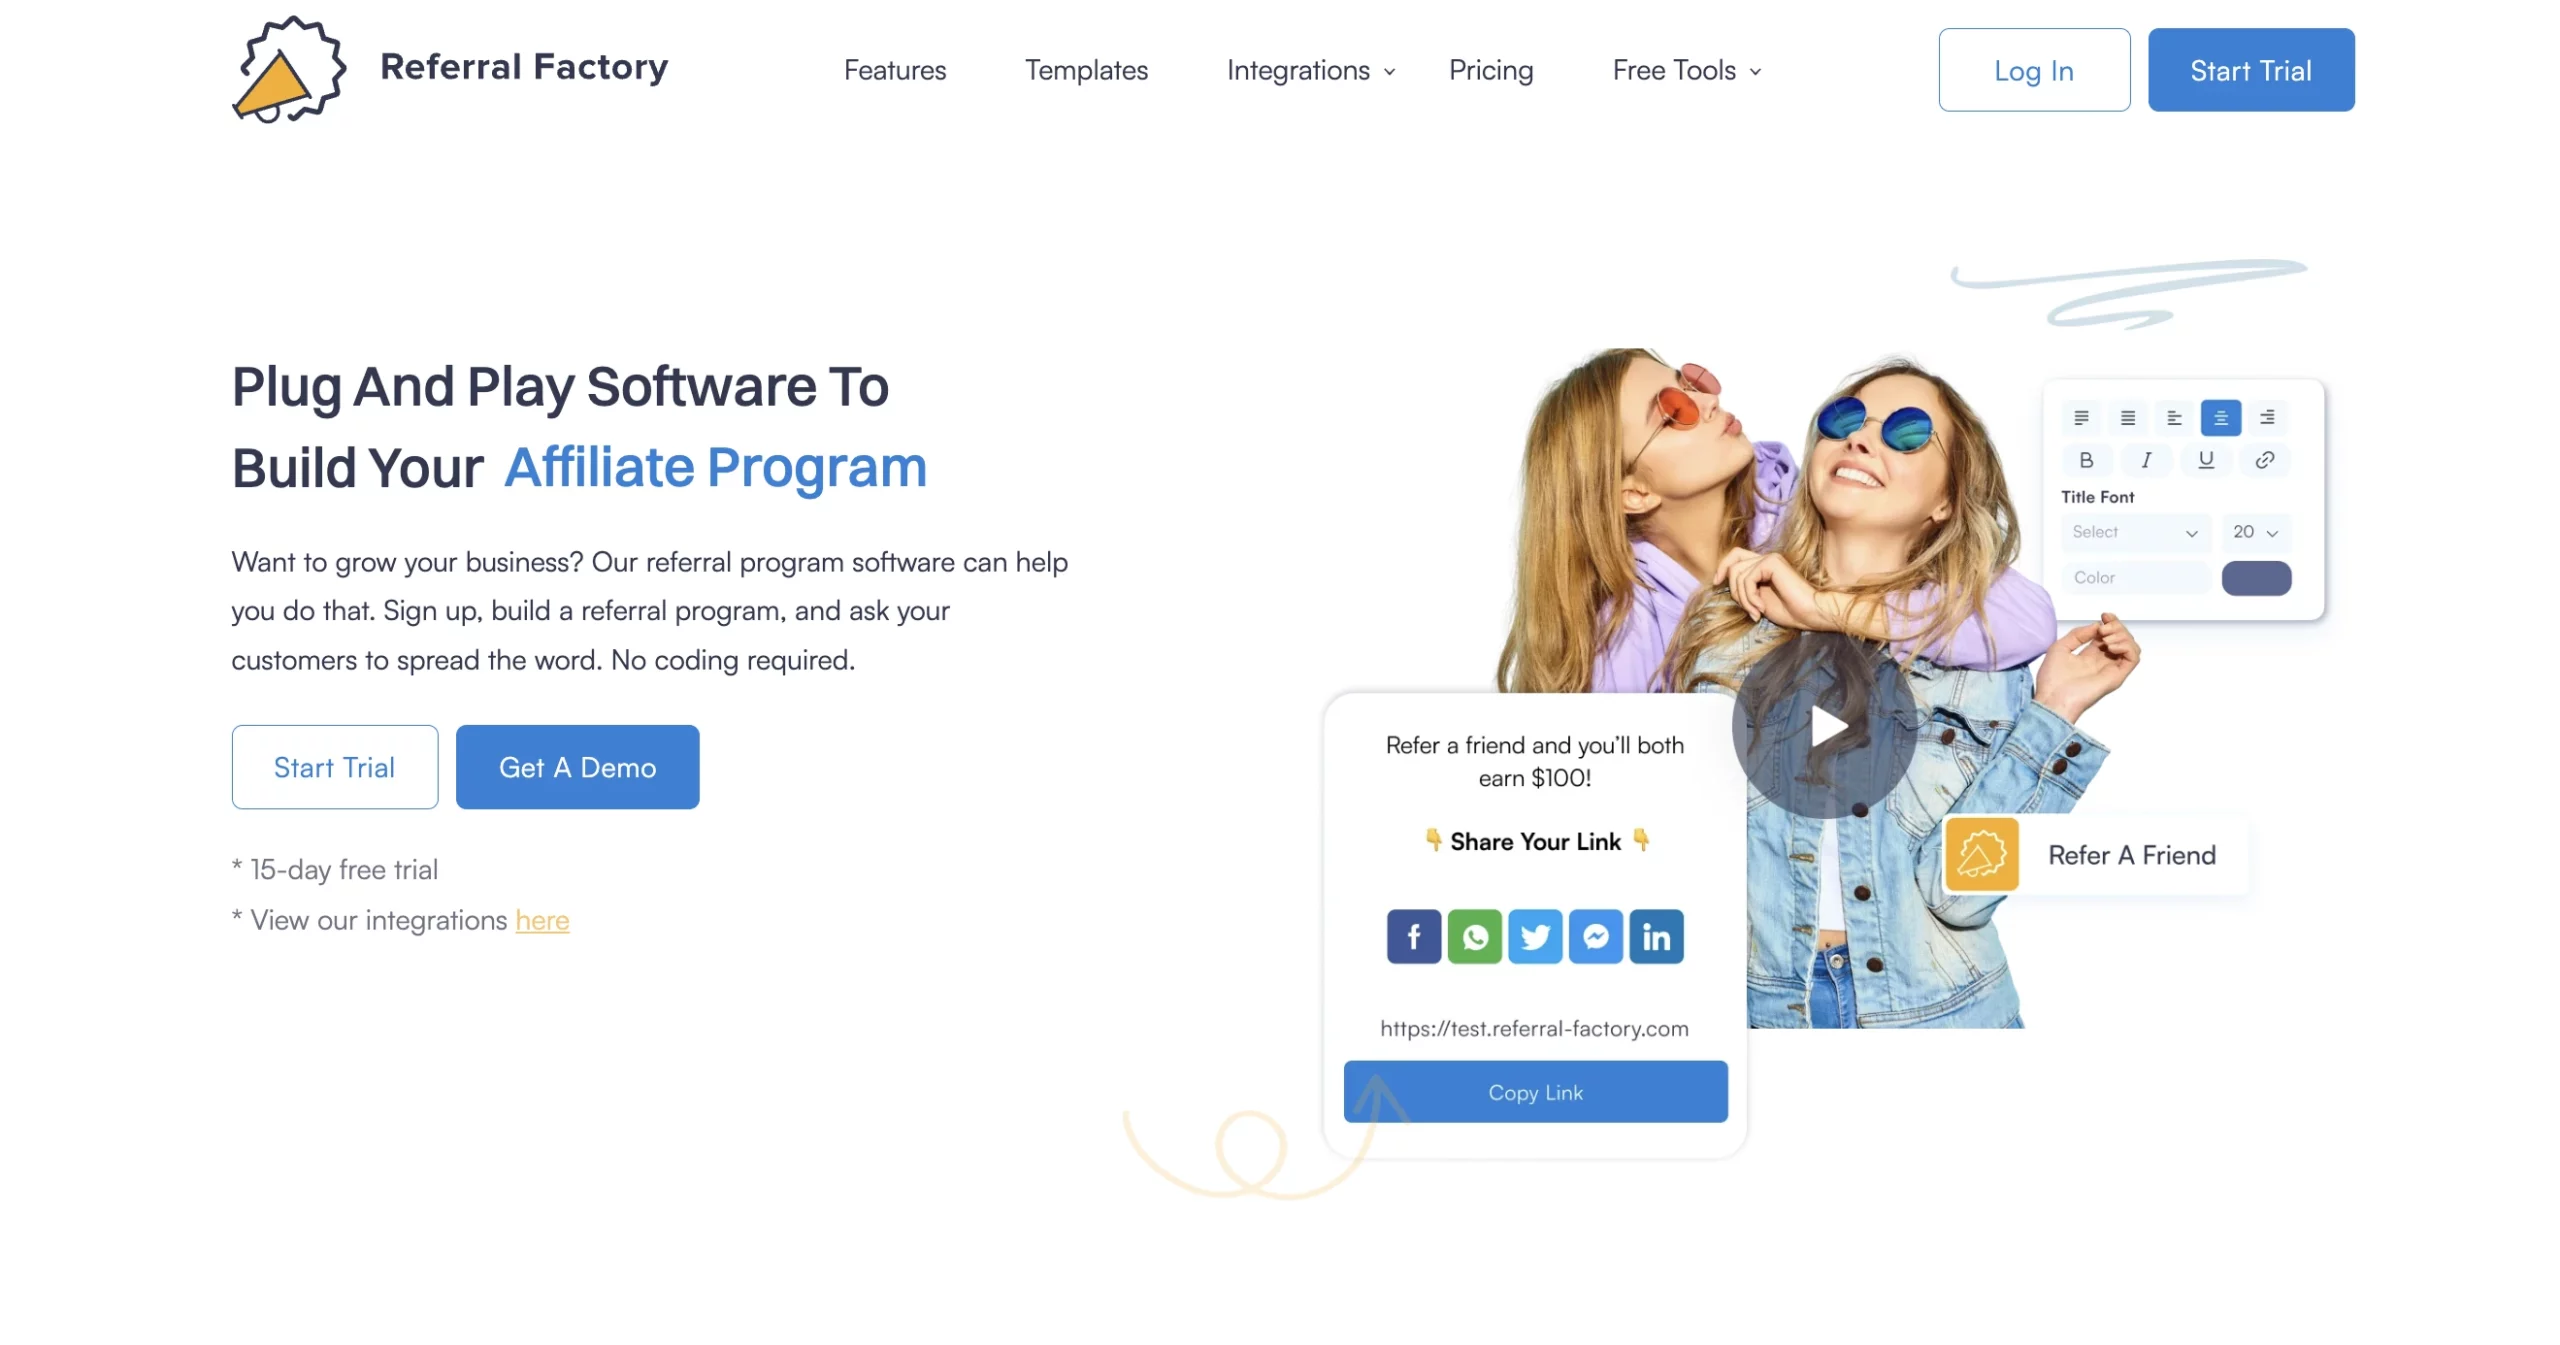 referral factory top-rated affiliate software plug and play build your affiliate program